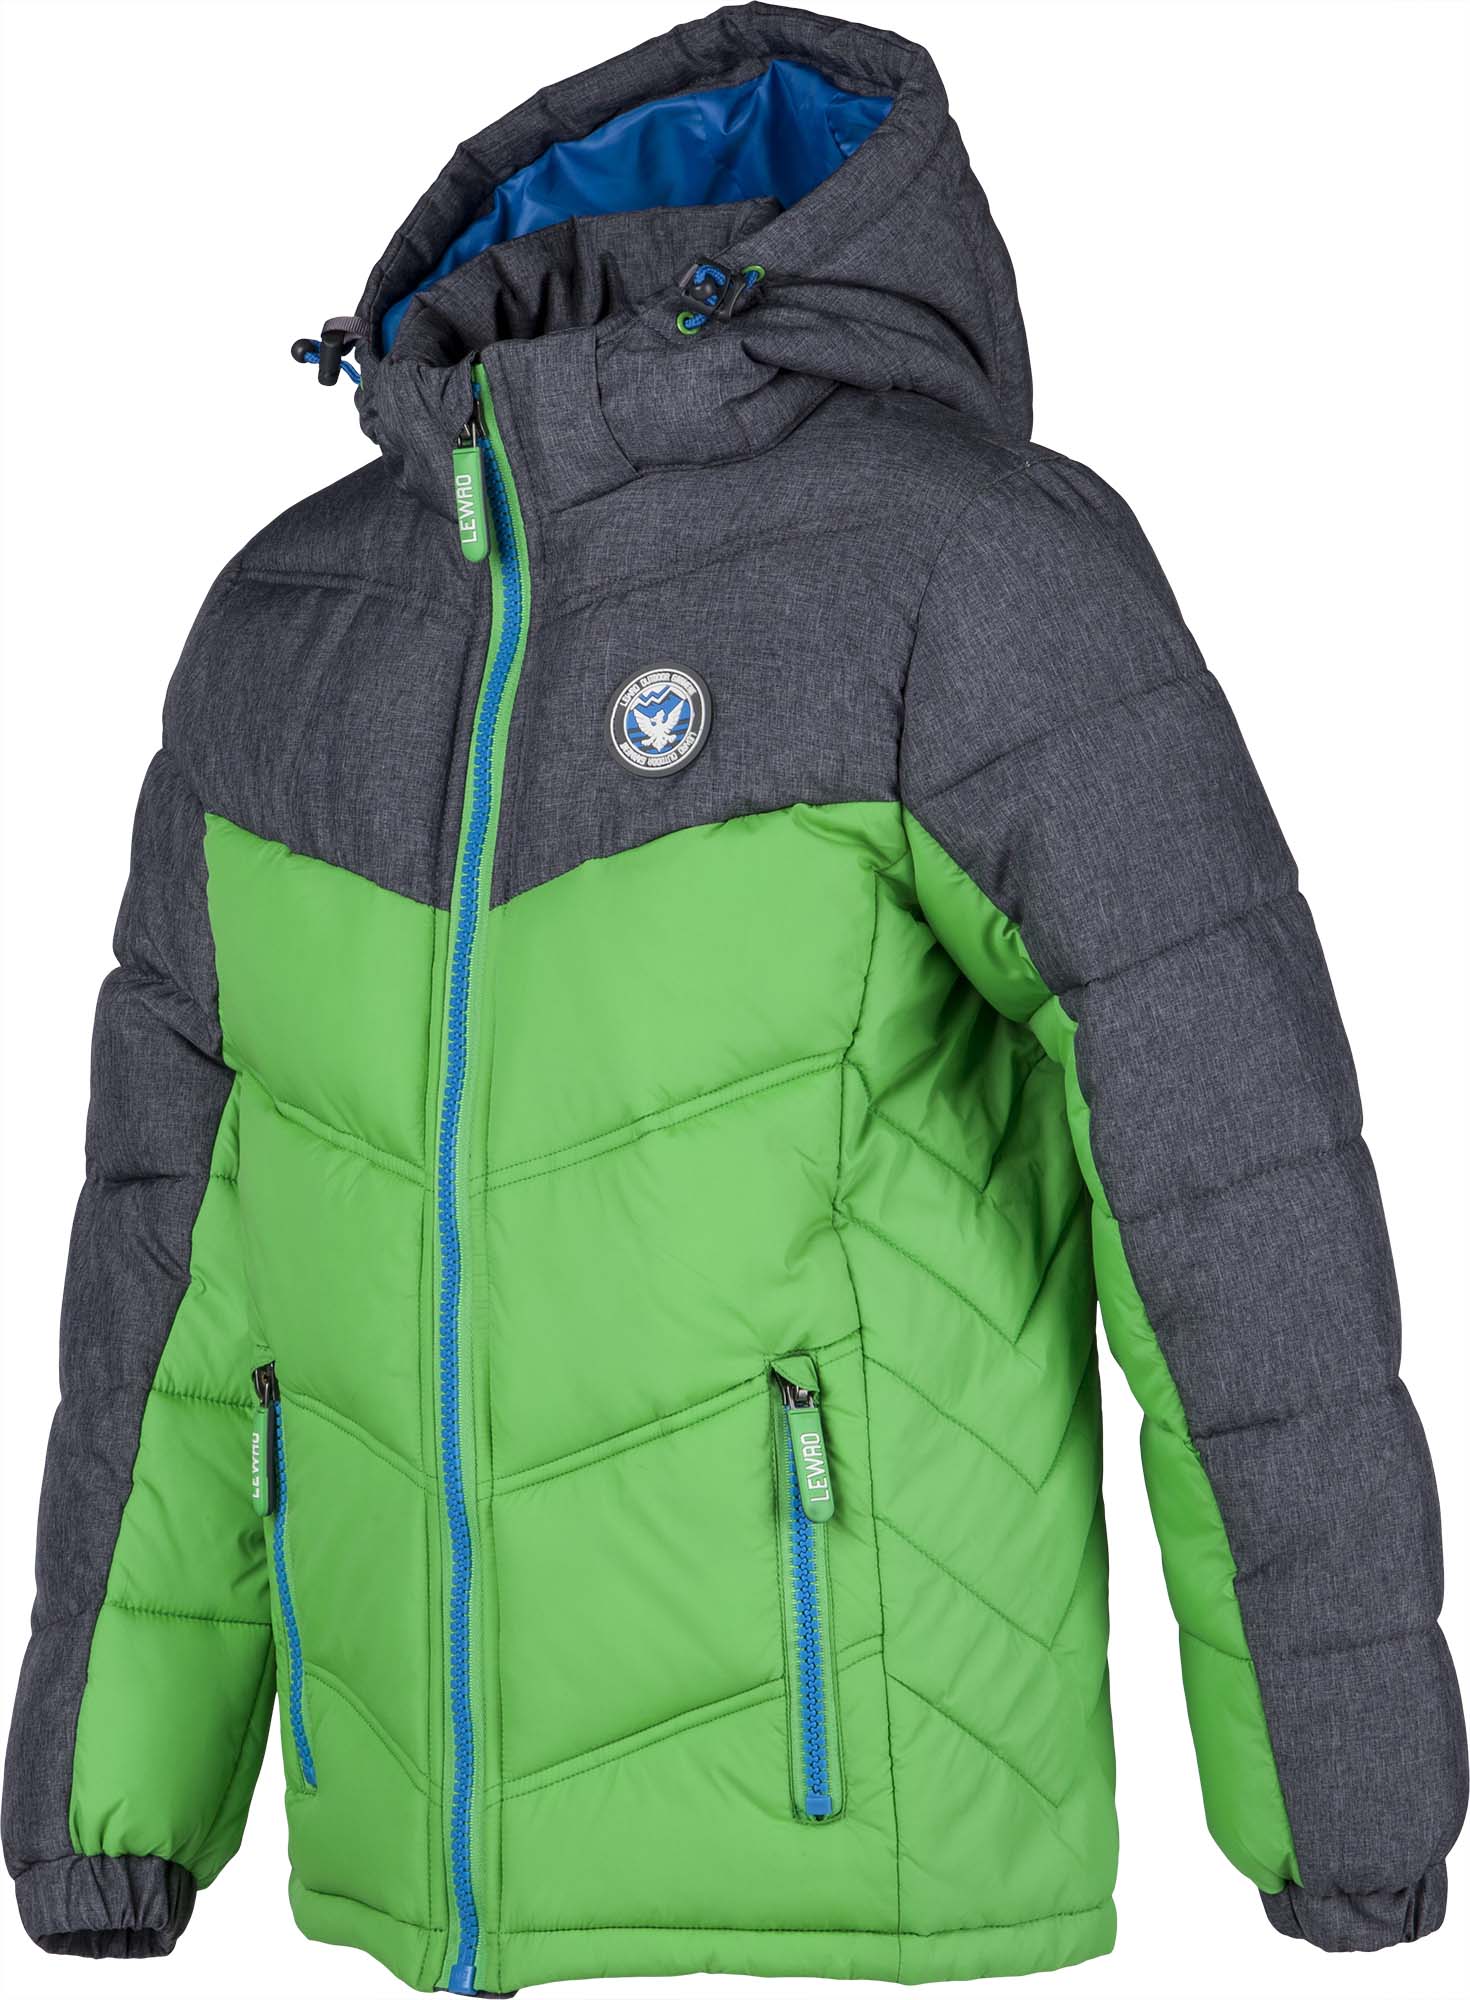 Boys’ quilted jacket